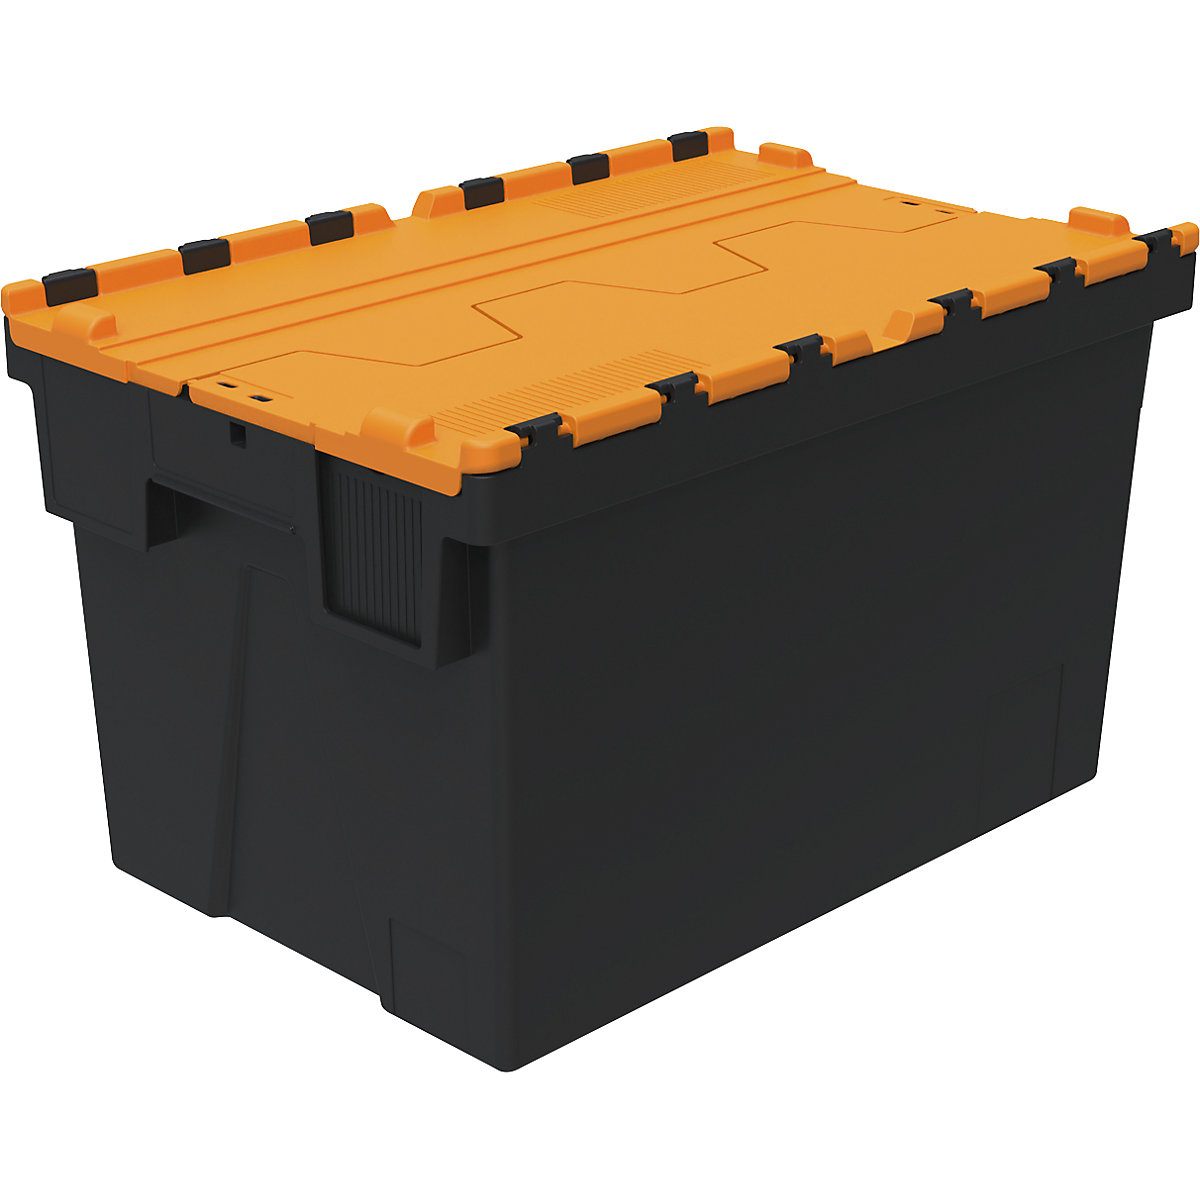 Reusable stacking container